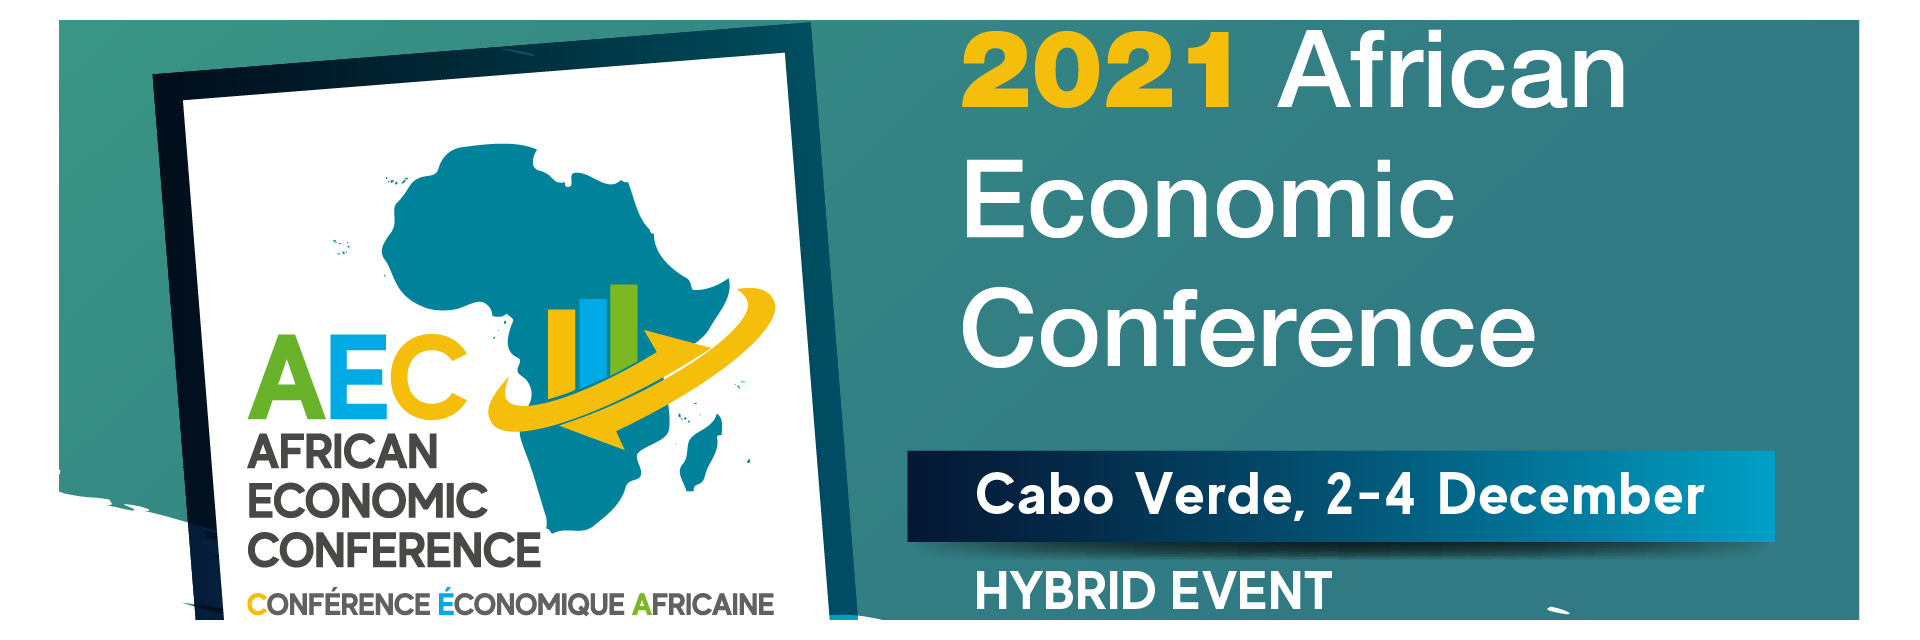 African Economic Conference 2021